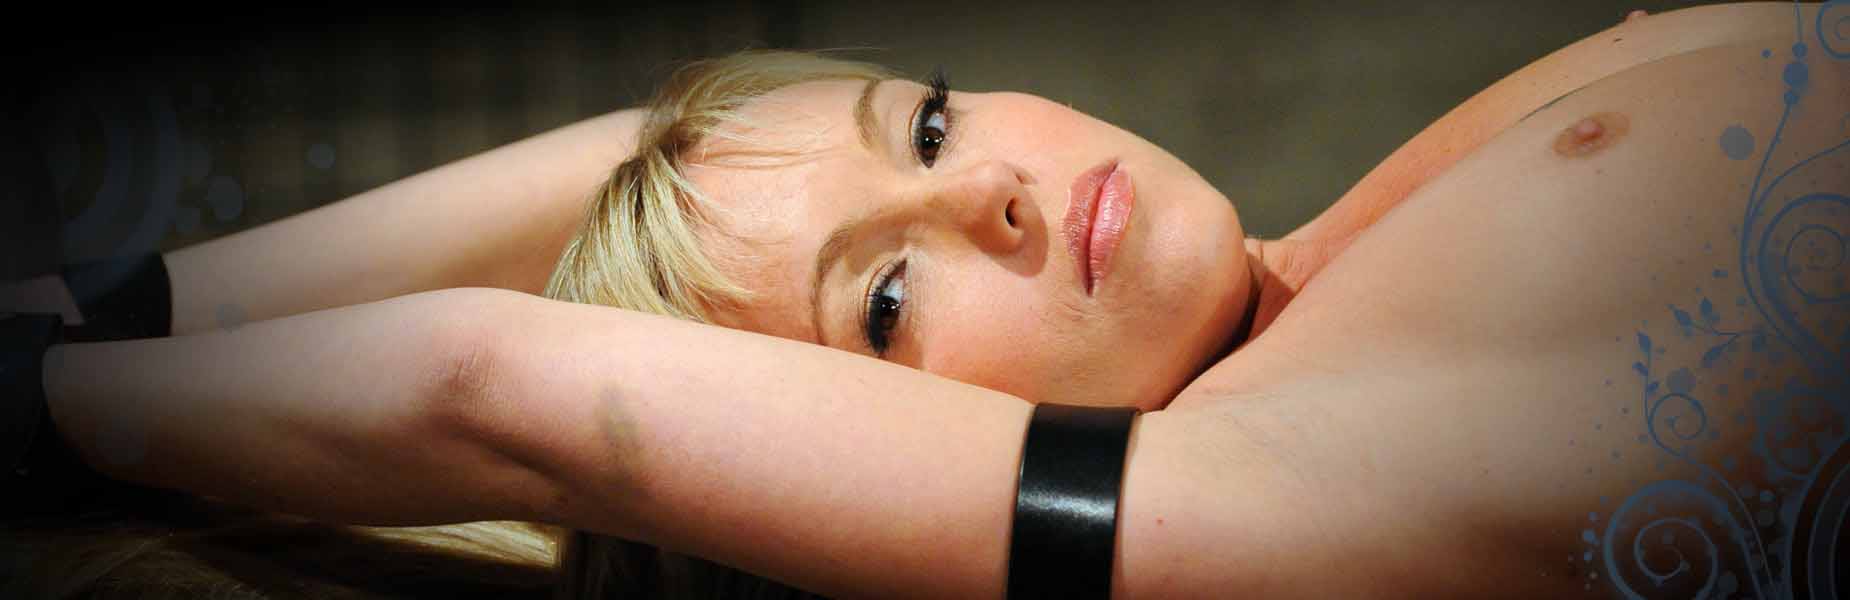 BDSM How To's And Instructional Bondage Articles